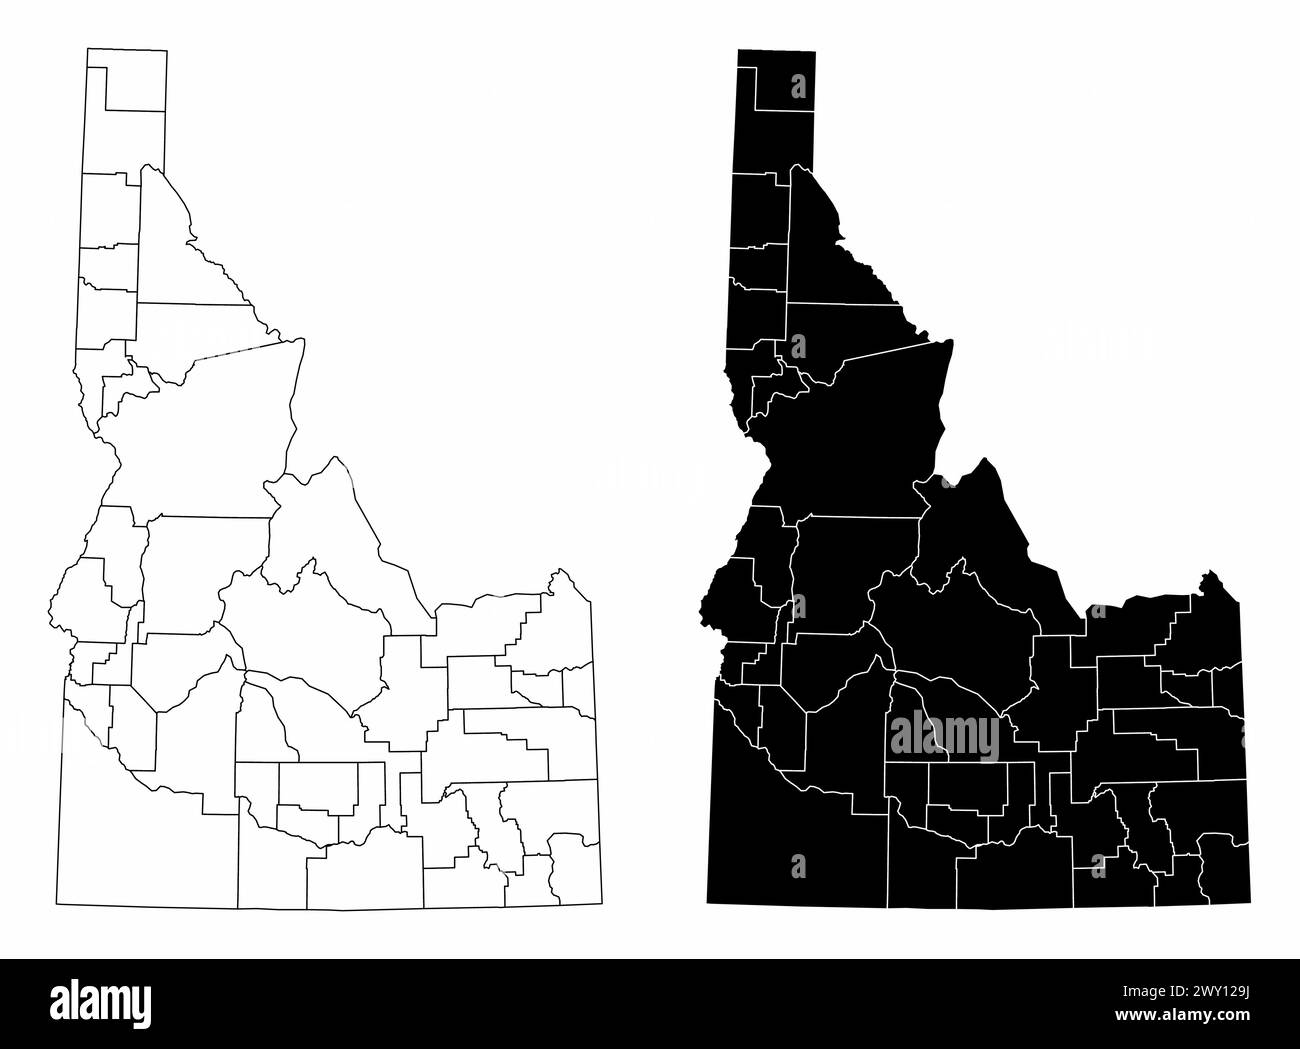 The black and white administrative maps of Idaho State, USA Stock Vector